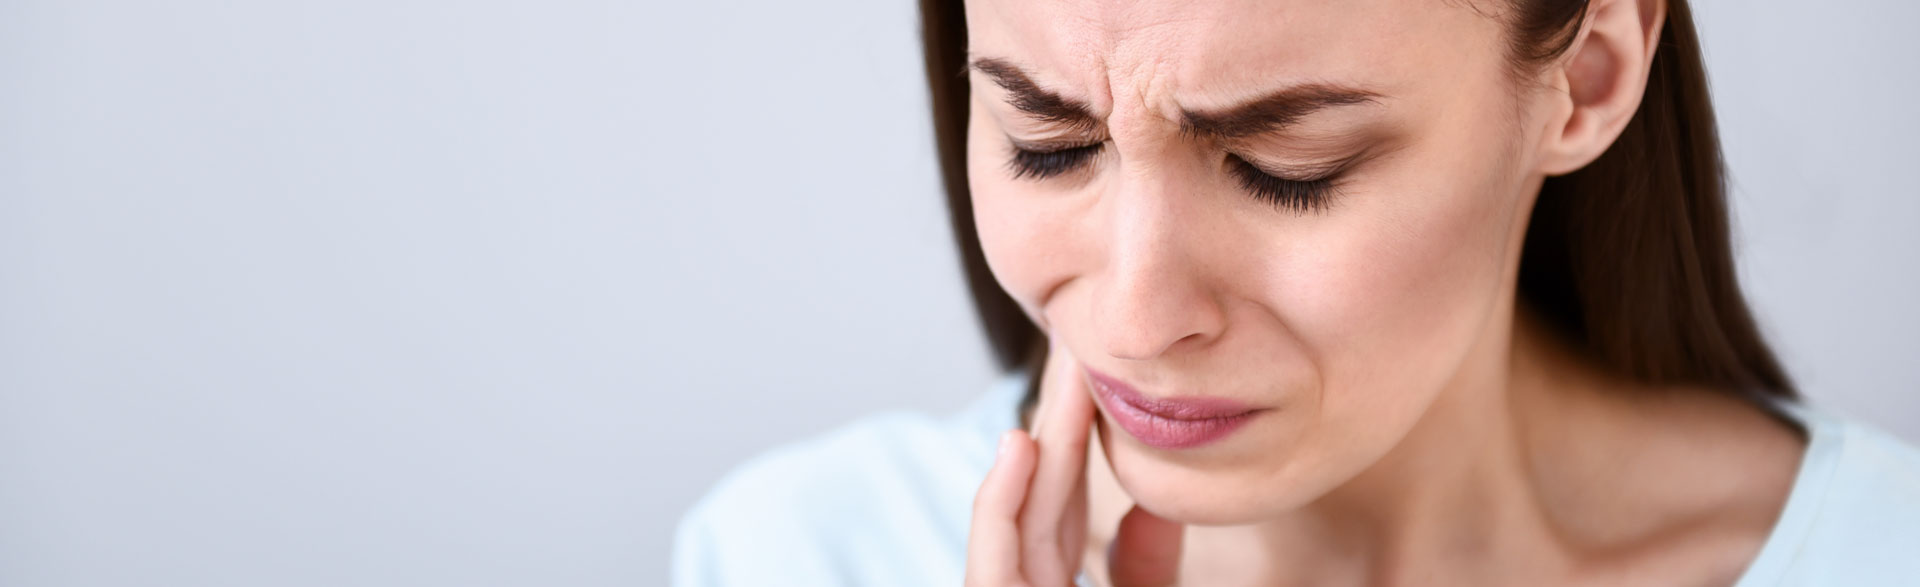 Woman suffering from jaw pain